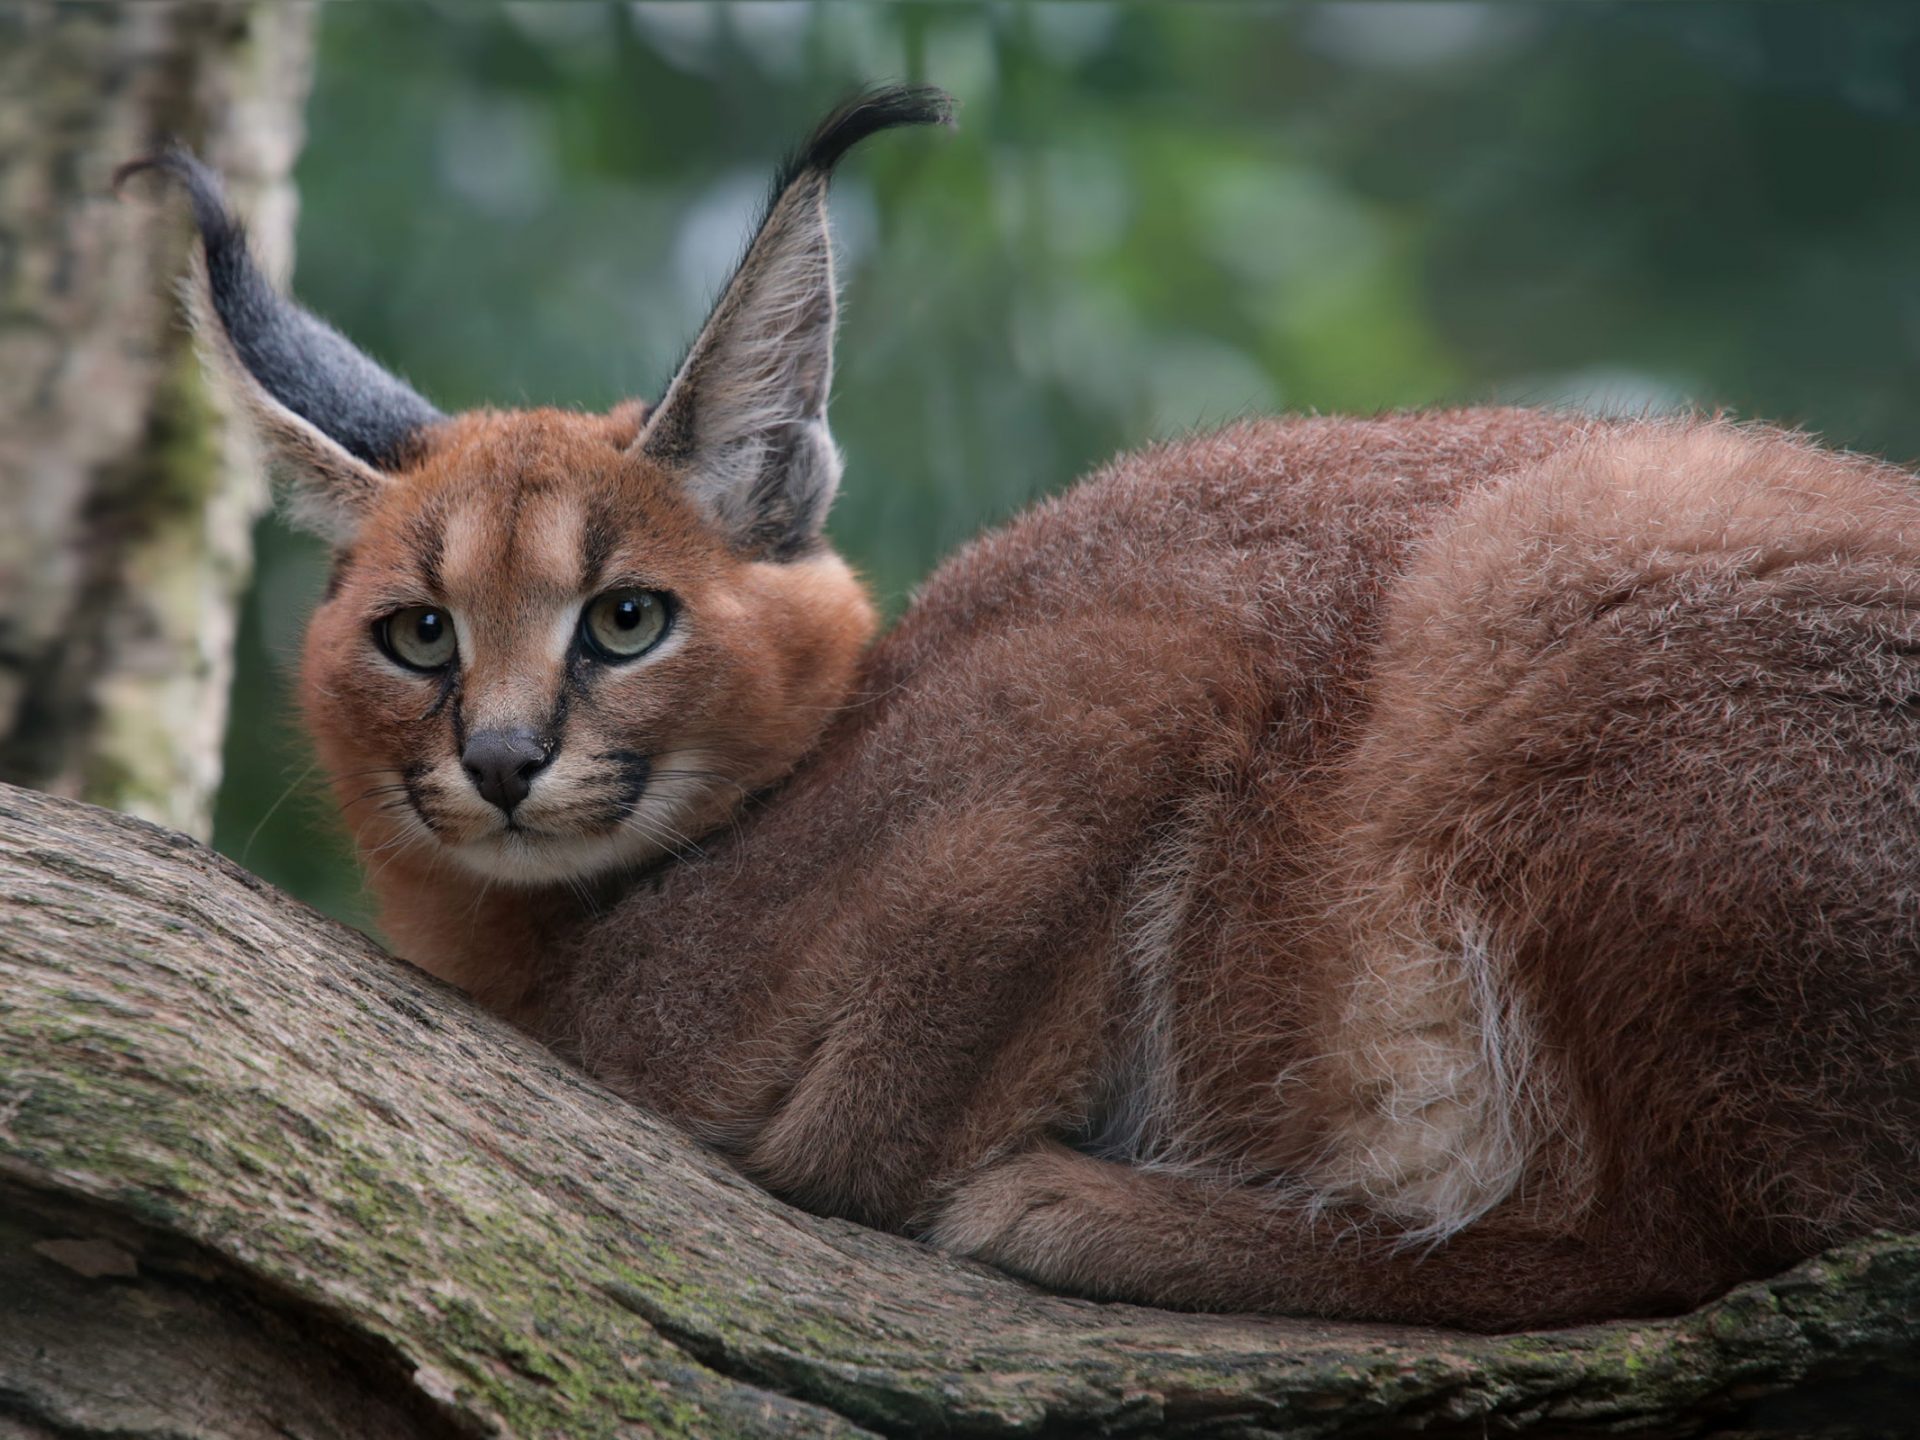 Caracal caracal Caracal, English Pronunciation K Aer ə K æ L Is A Medium Sized Wild Cat That Lives In Africa, The Middle East, Persia And The Indian Subcontinent, Wallpaper13.com